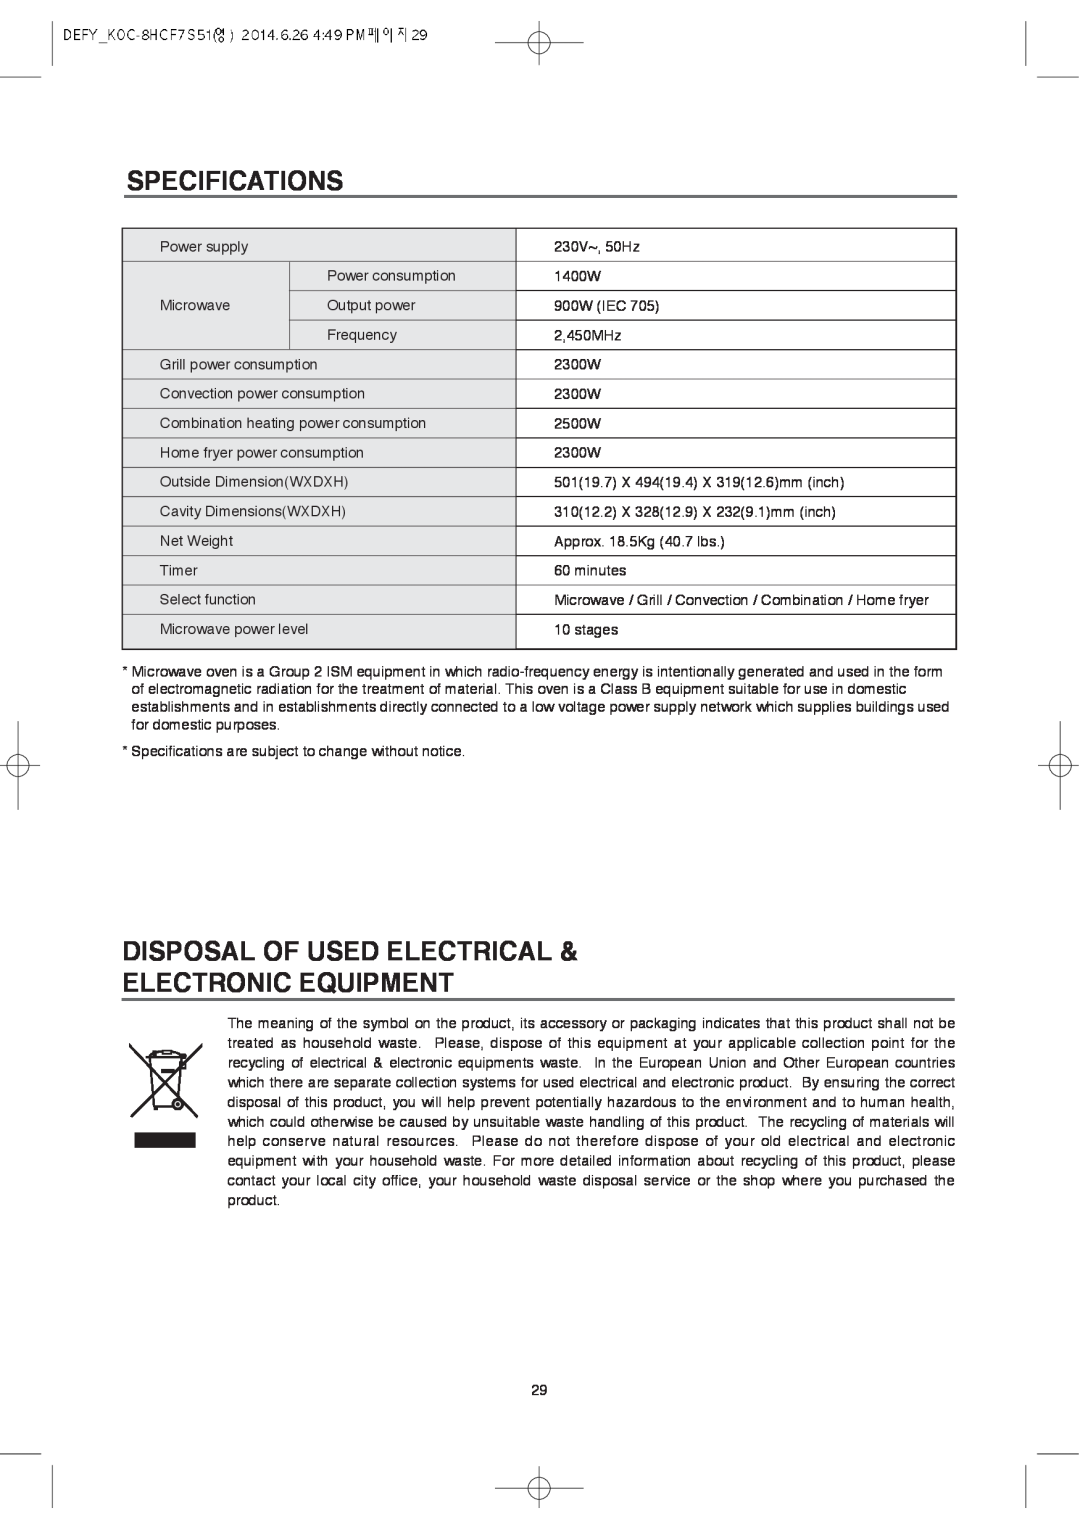 Defy Appliances MWA 2434 MM user manual Specifications, Disposal Of Used Electrical, Electronic Equipment 